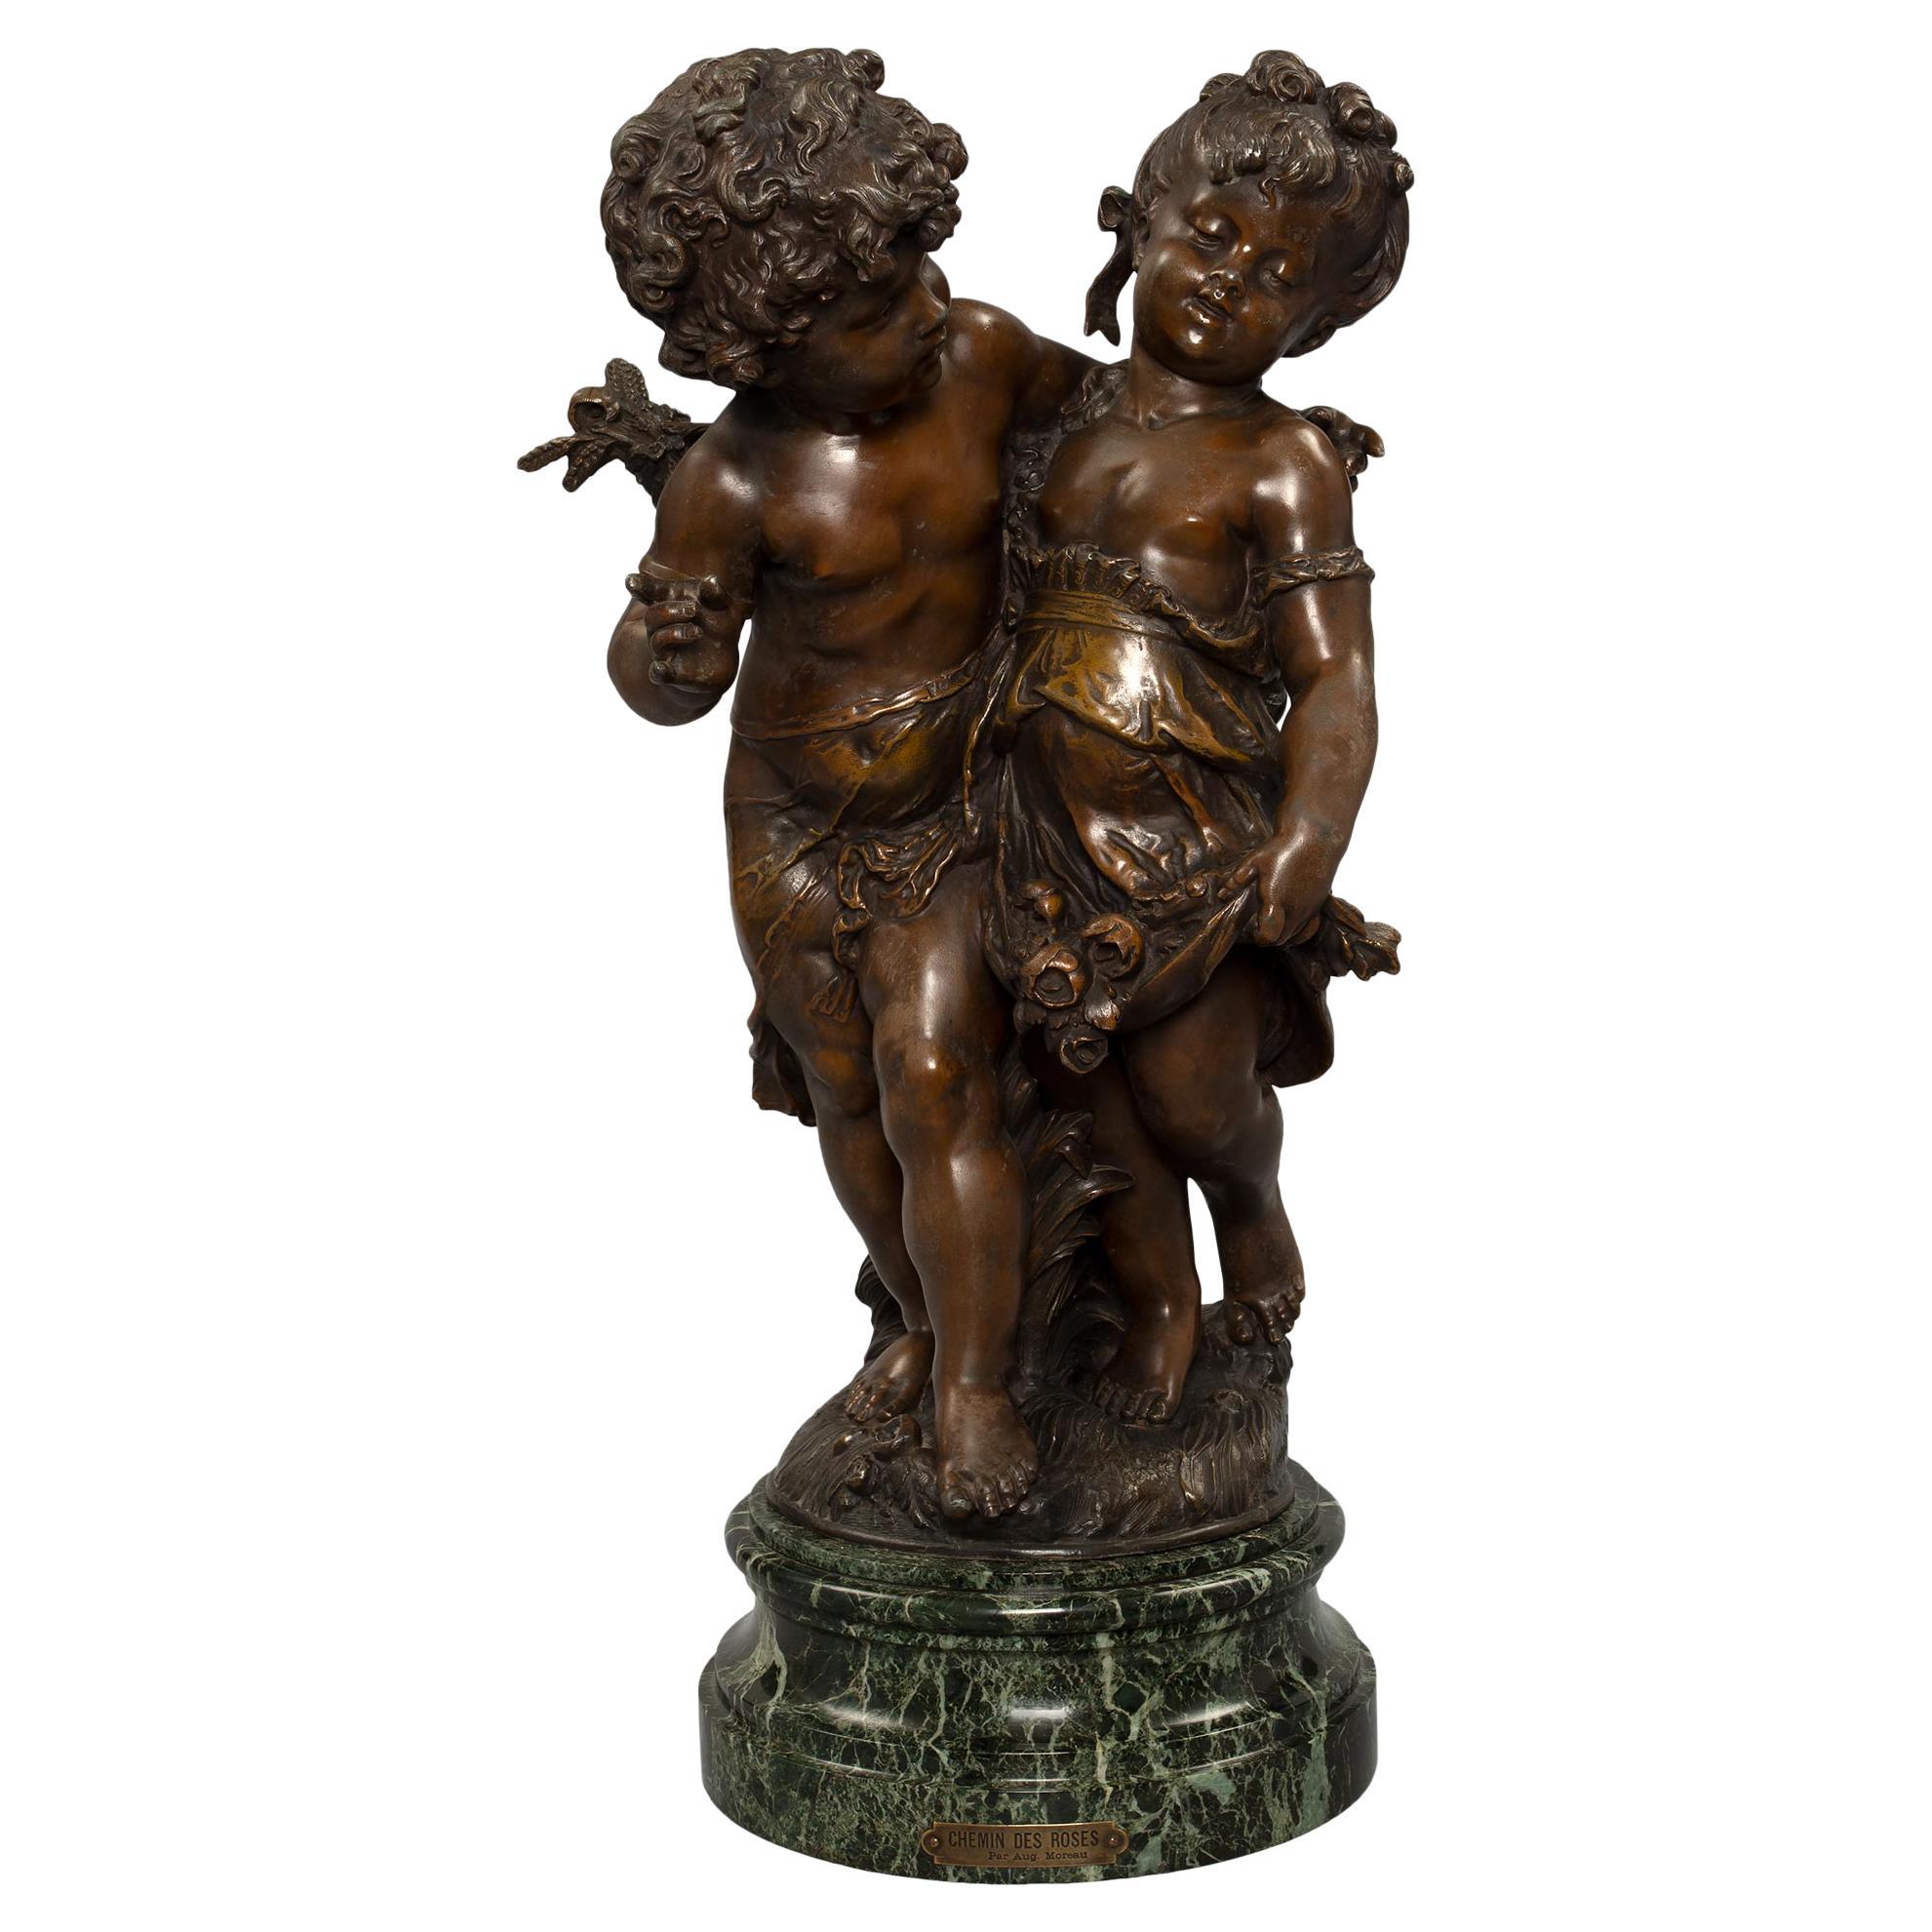 French 19th Century Patinated Bronze Entitled ‘Chemin Des Roses’ by August Morea